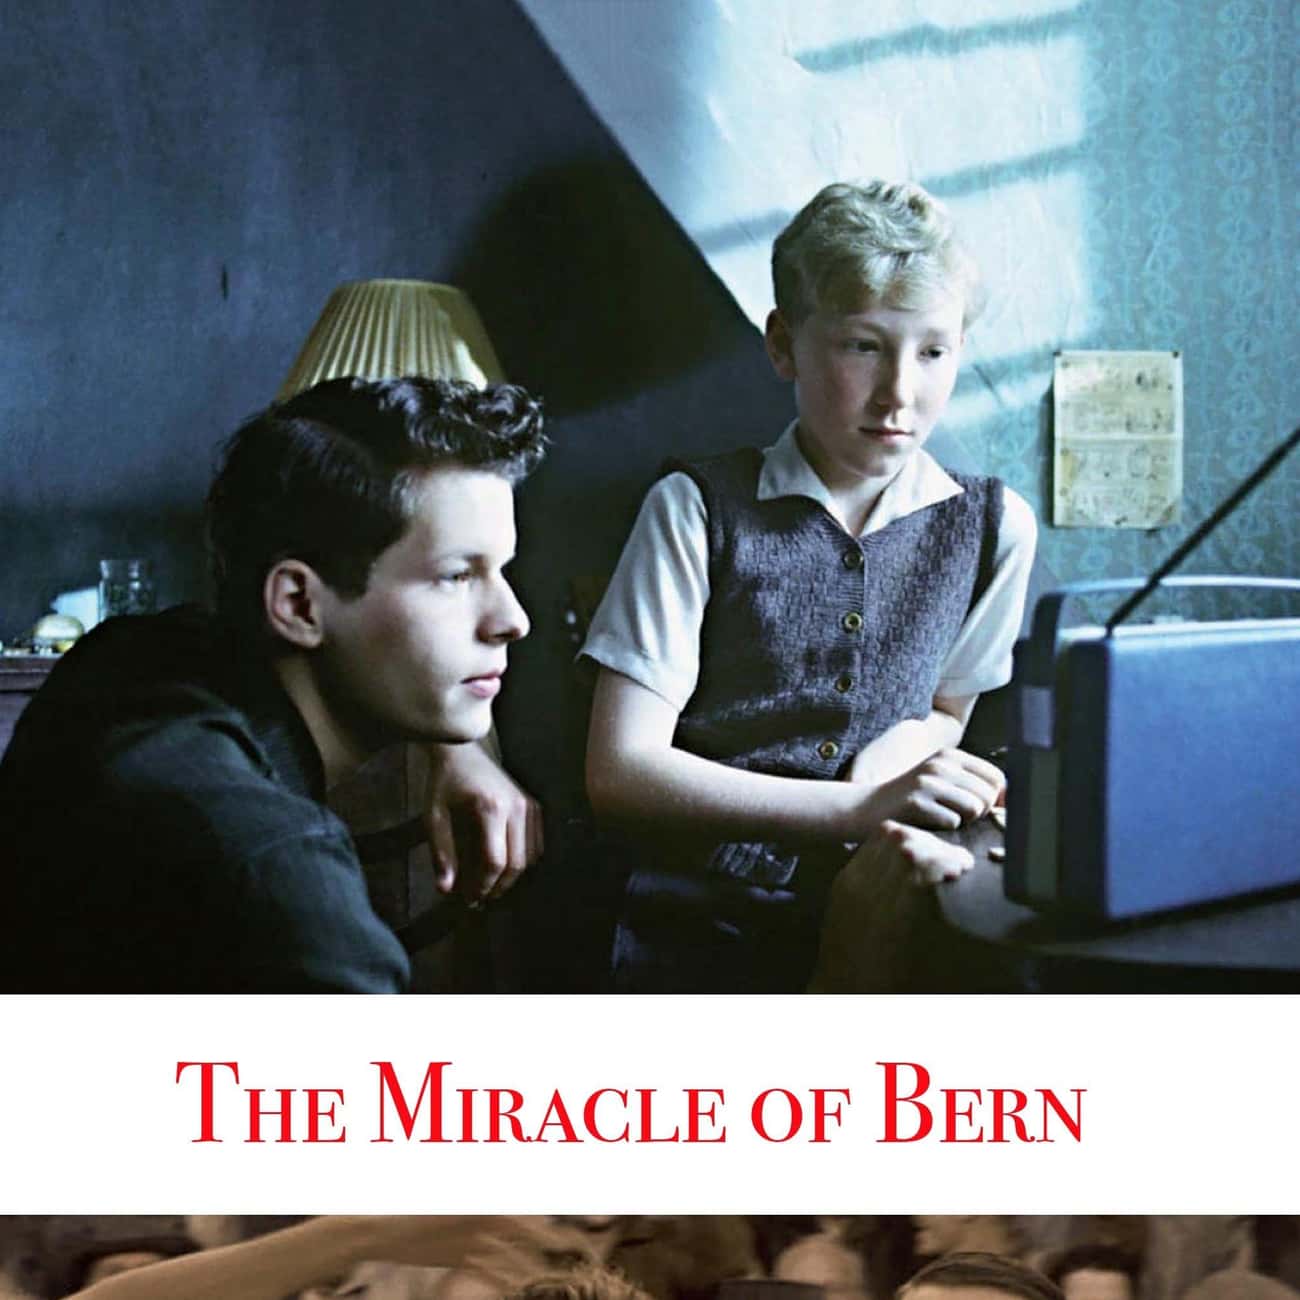 The Miracle of Bern